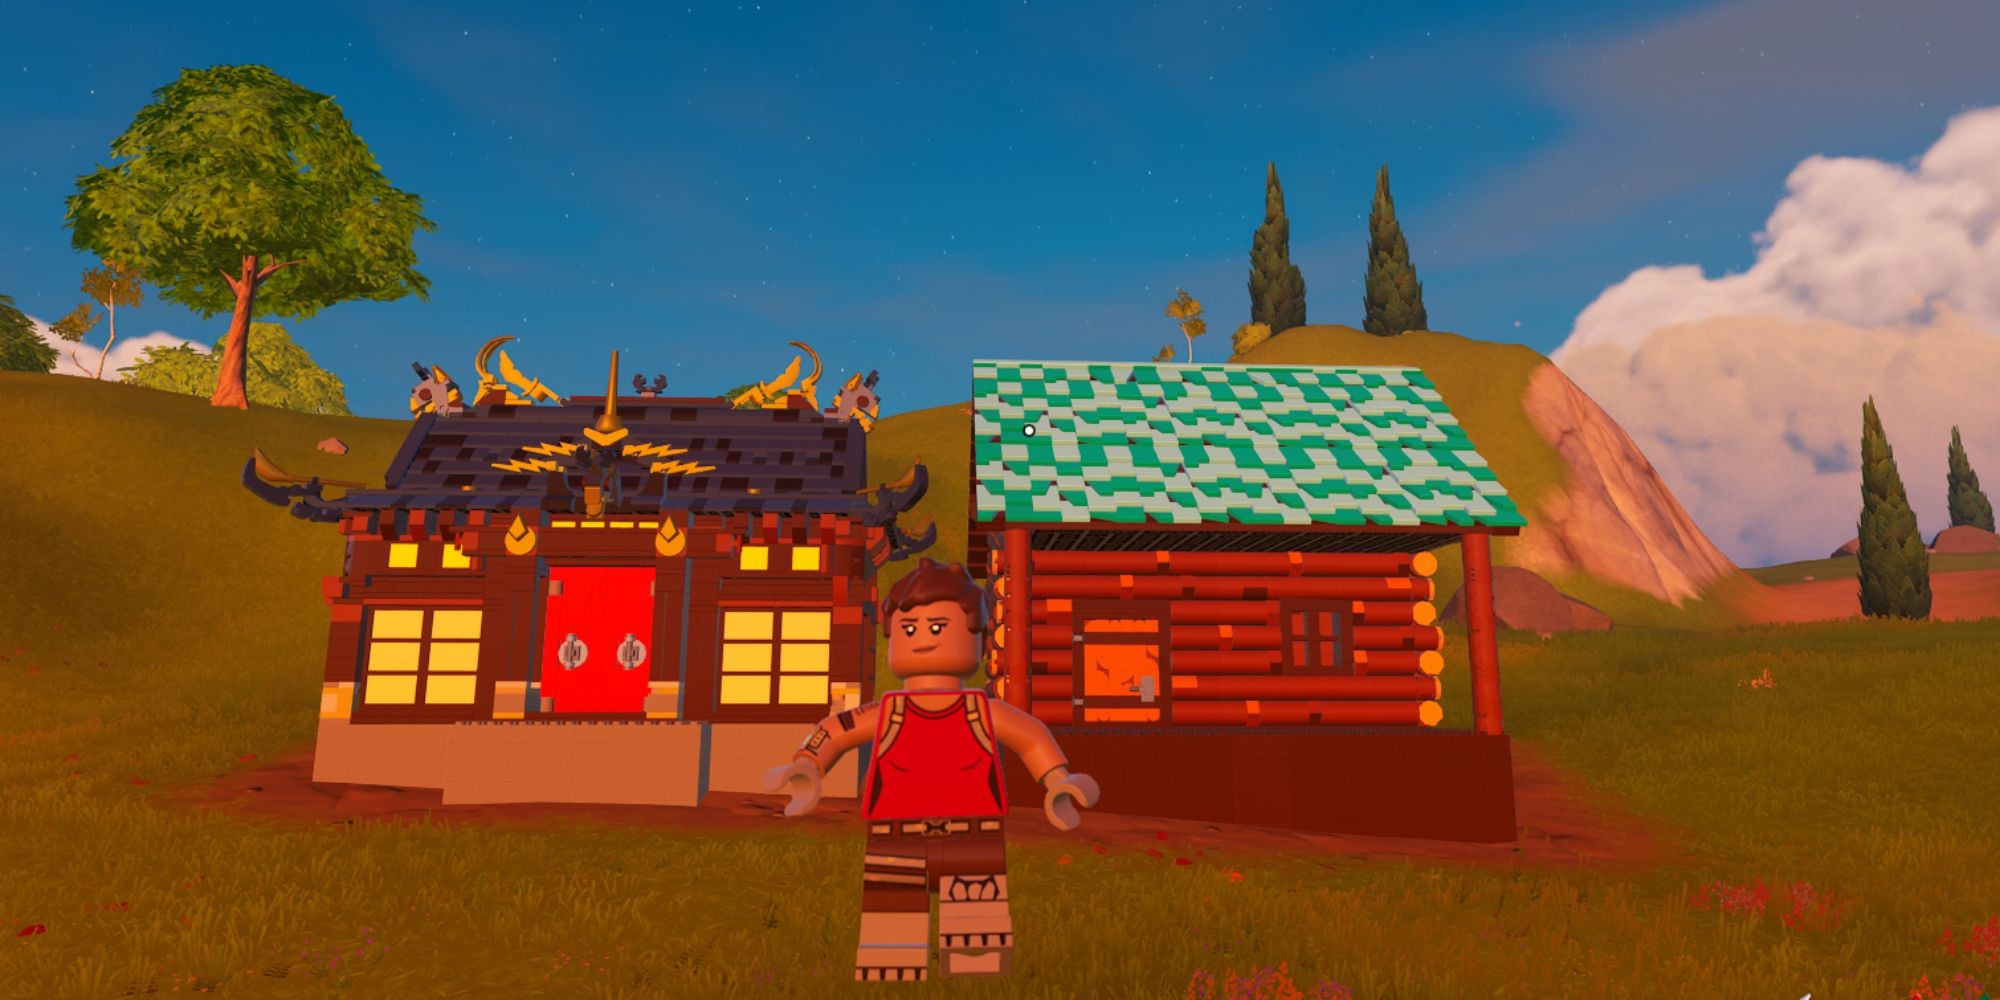 Lego Fortnite player in front of shogun house and log cabin in grasslands